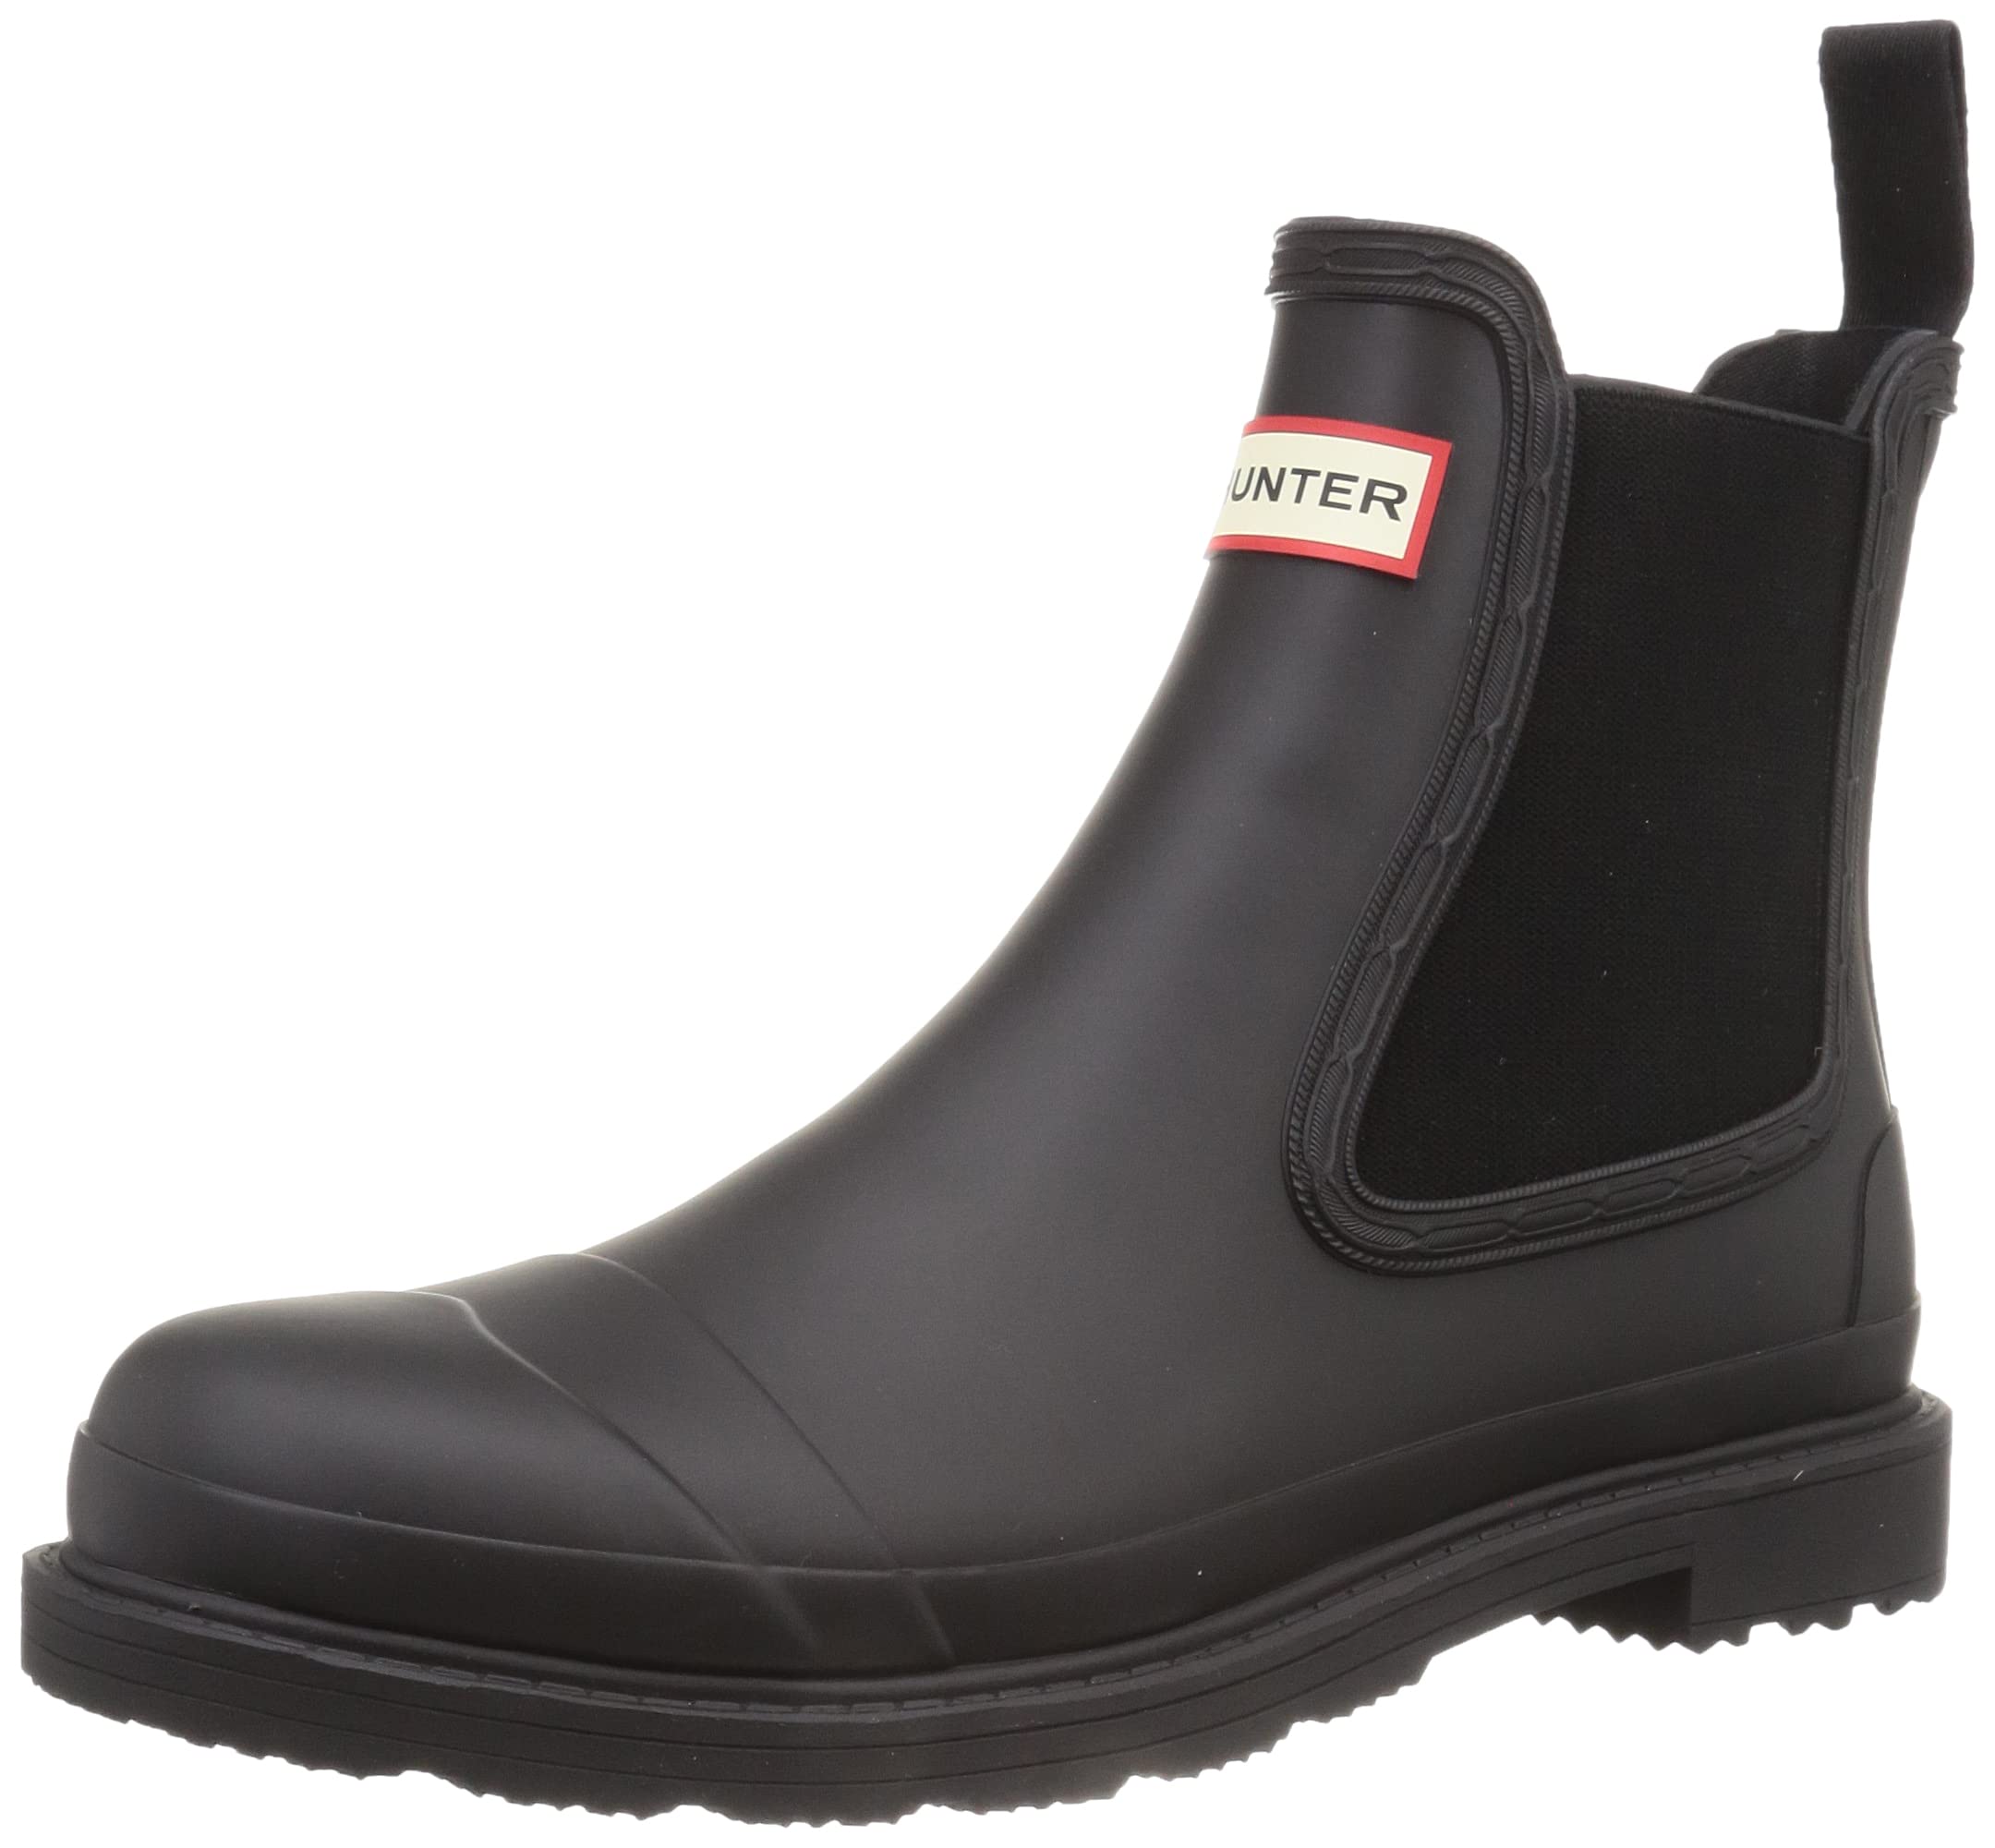 Hunter Commando Chelsea Boot for Men - Waterproof, Matte Finish, and Rubber Outsole Shoes